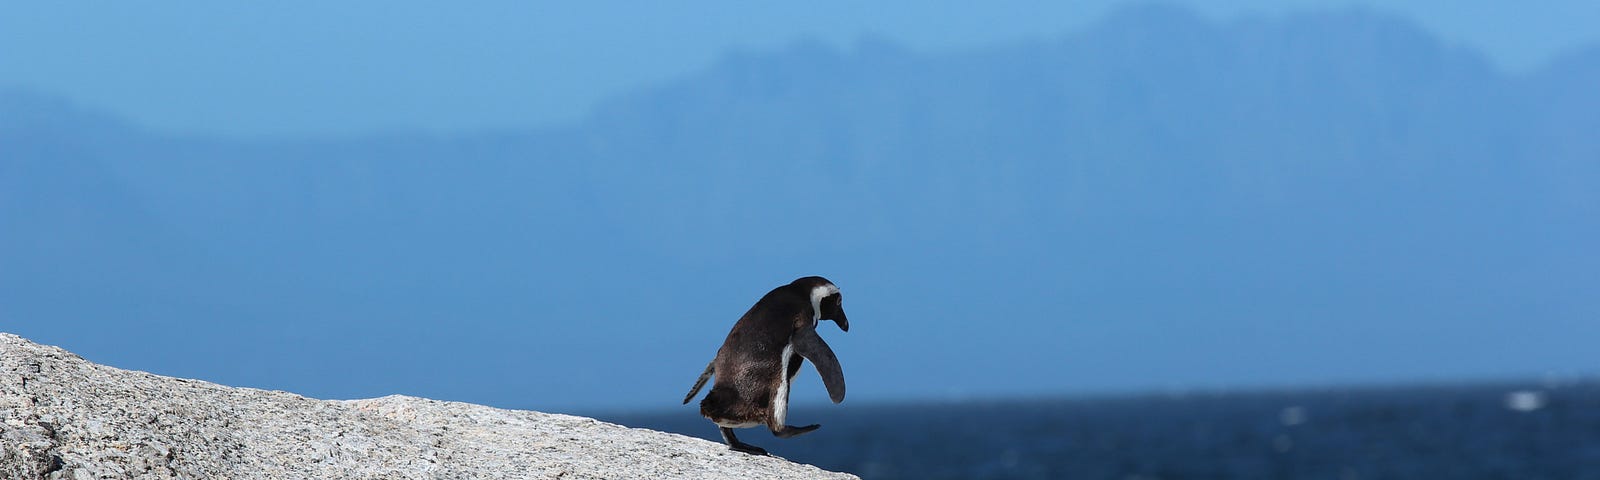 Penguin walking down a rocky surface